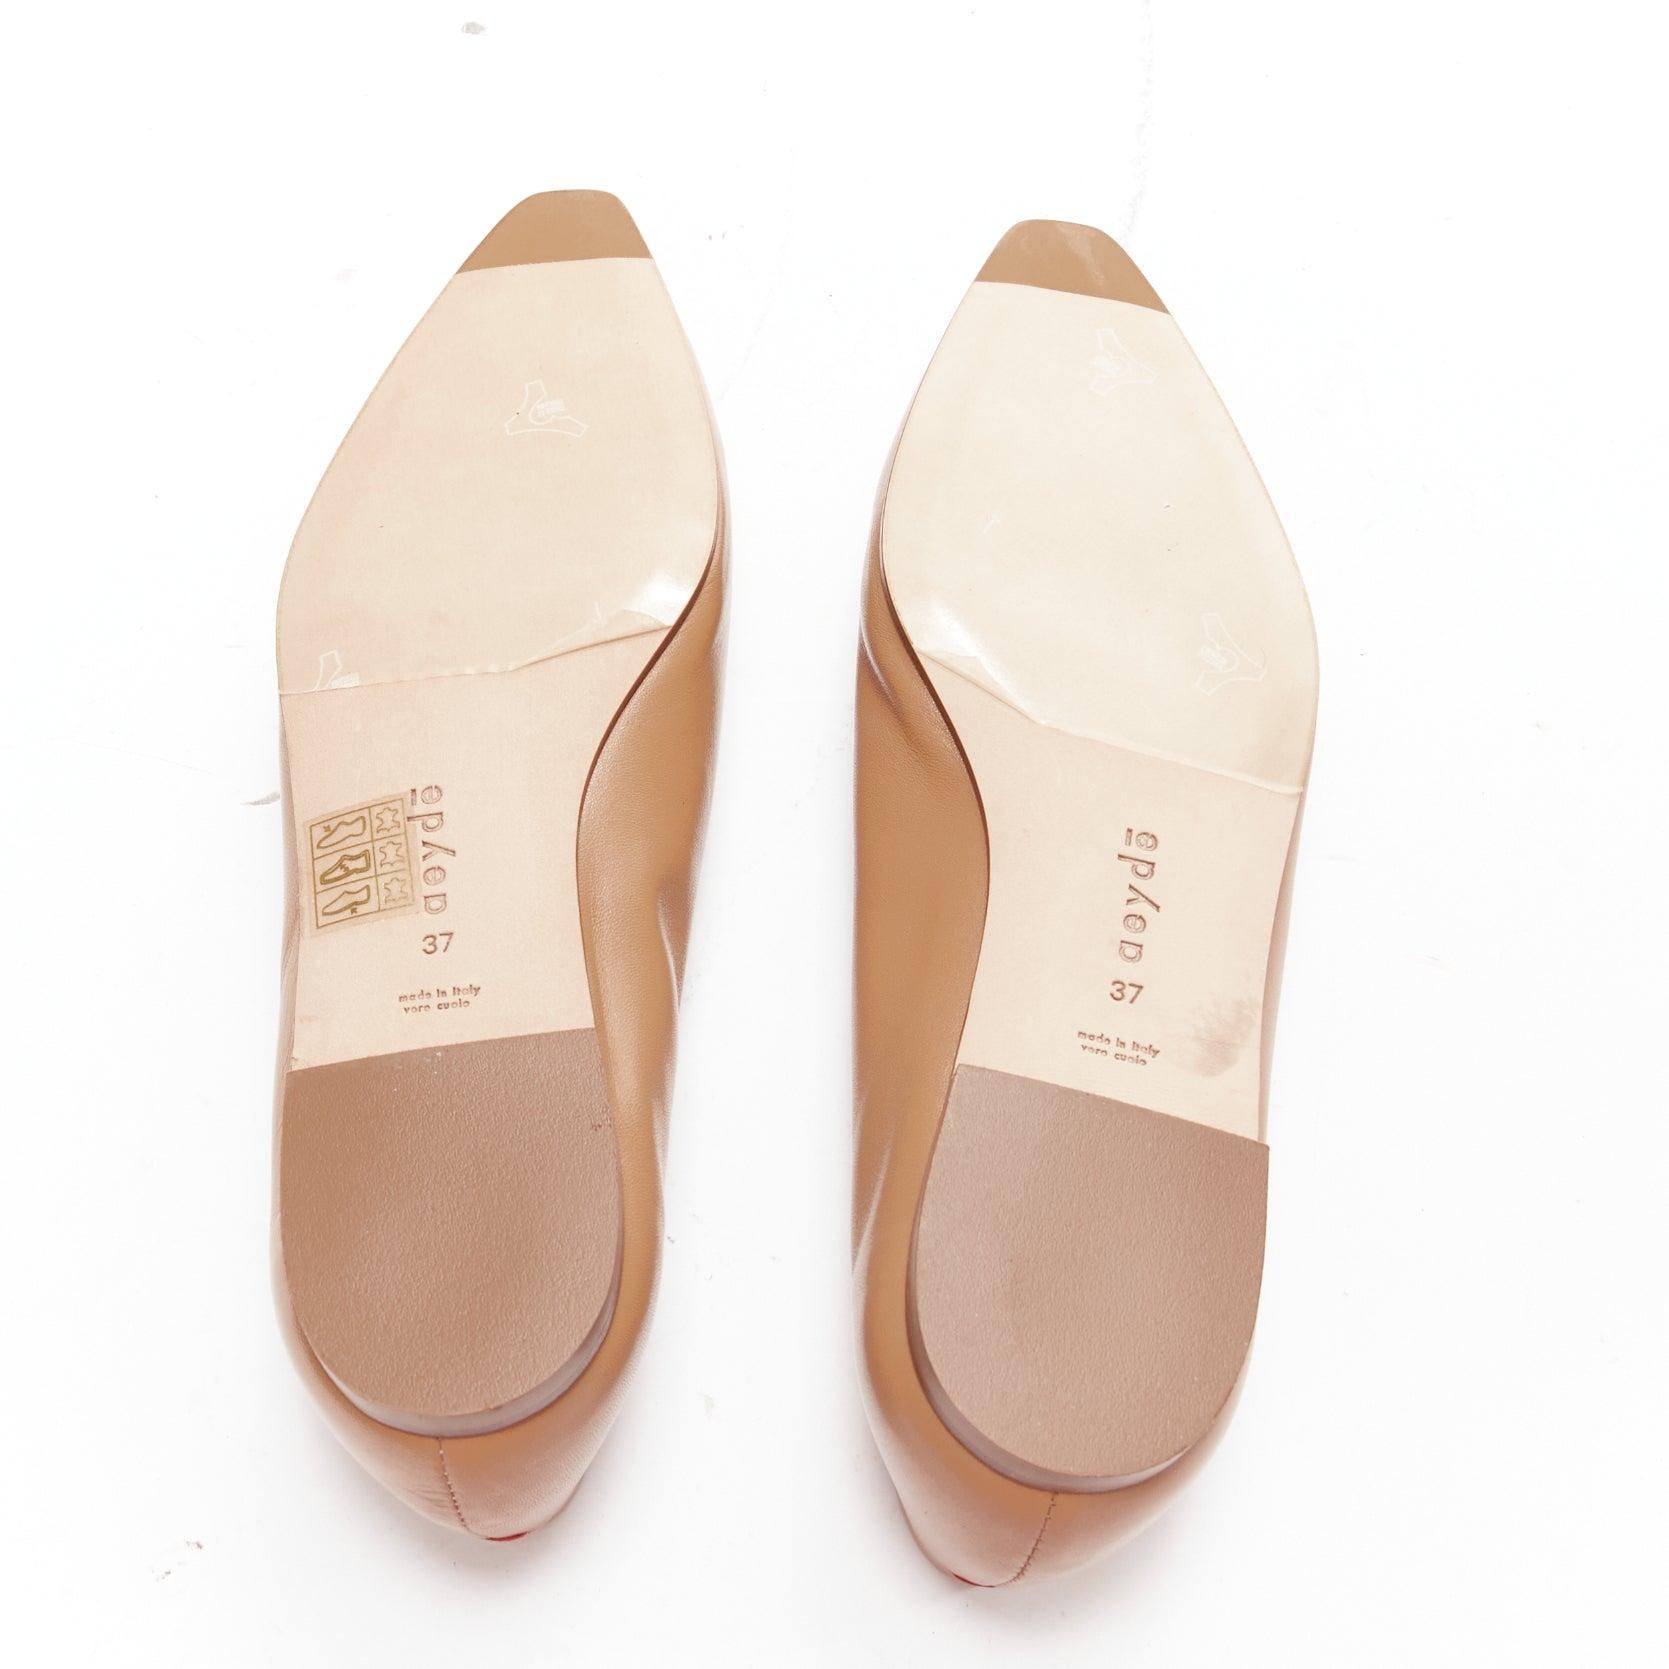 new AEYDE nude smooth leather square toe ballet flats EU37 7